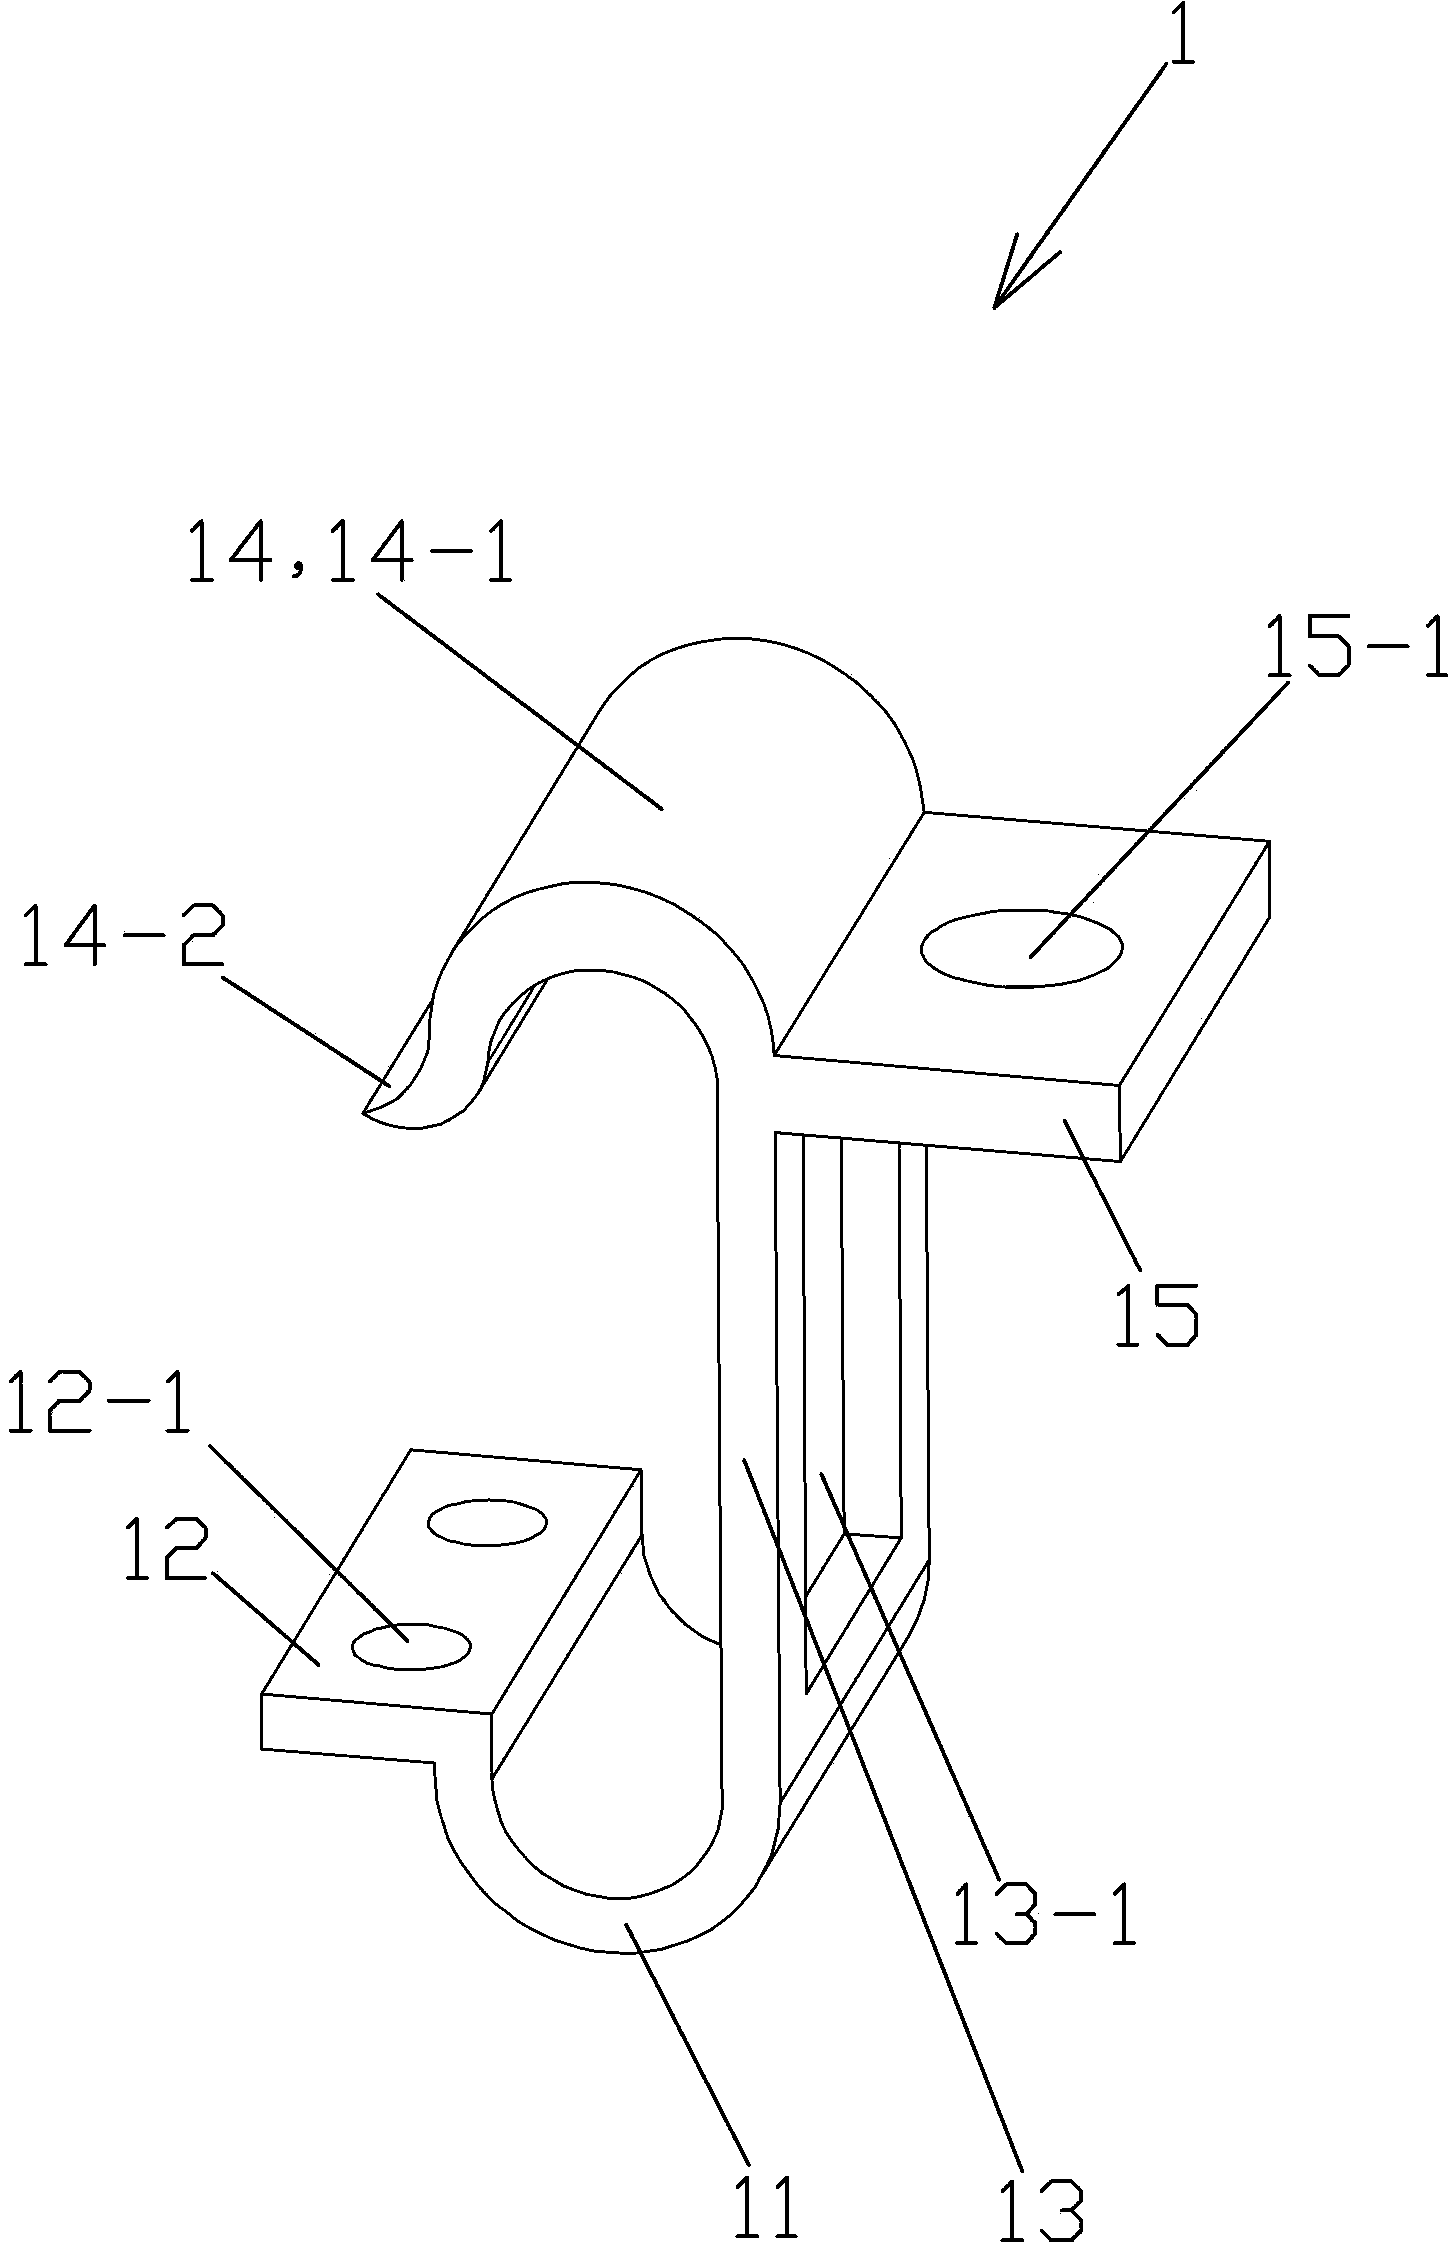 Ground potential operation non-bearing connection wire clamp